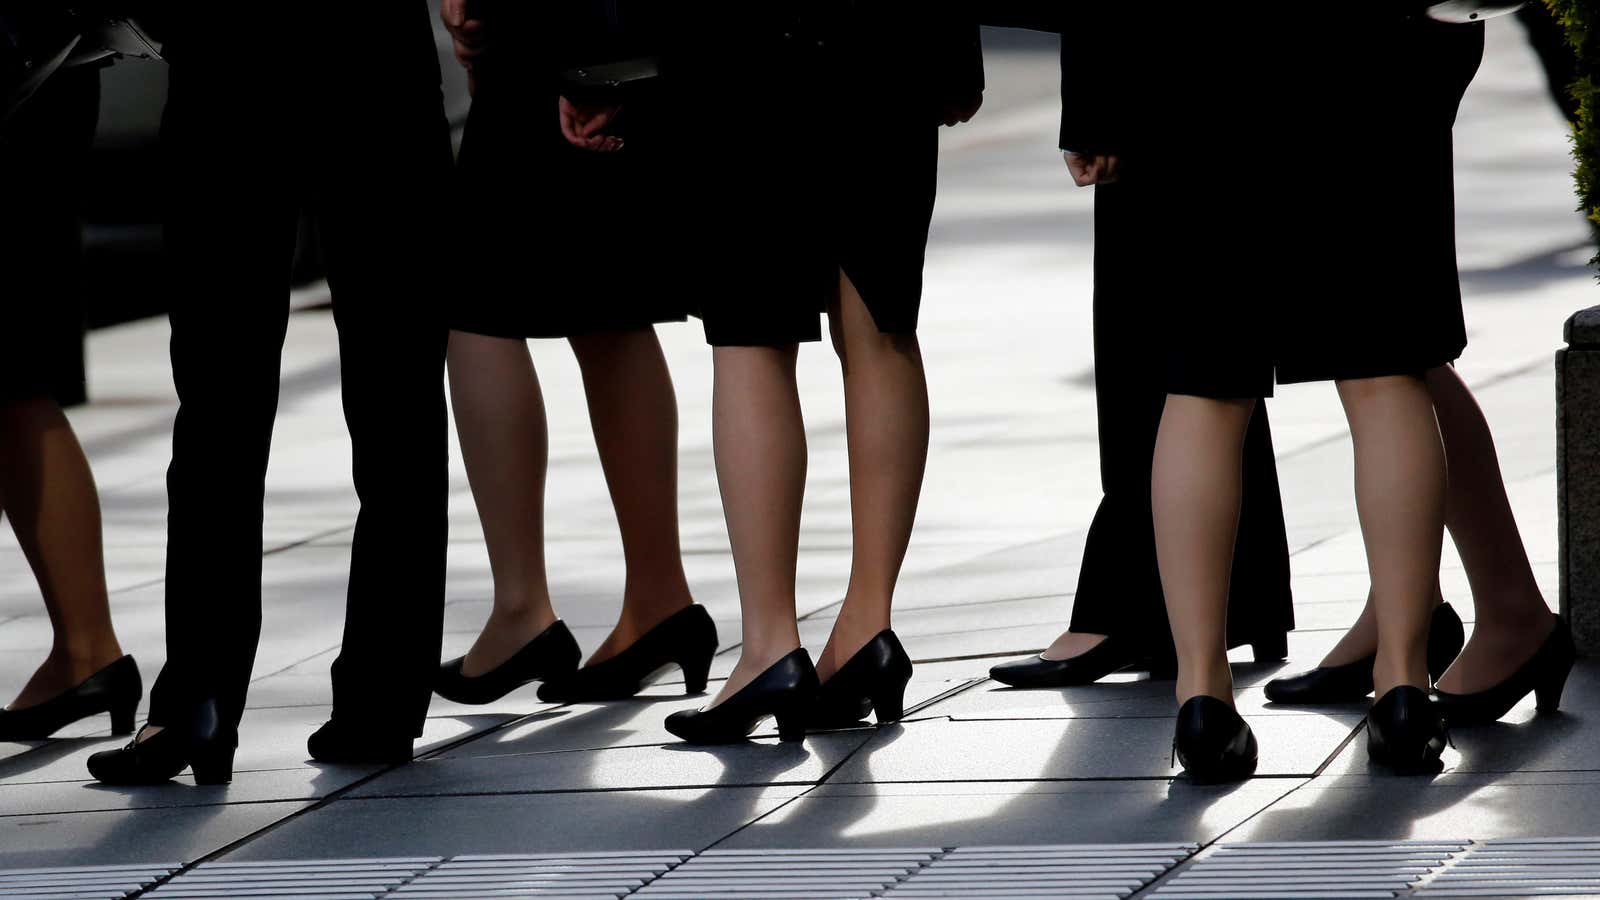 Female office workers wearing high heels, clothes and bags of the same colour are seen at a business district in Tokyo, Japan, June 4, 2019.